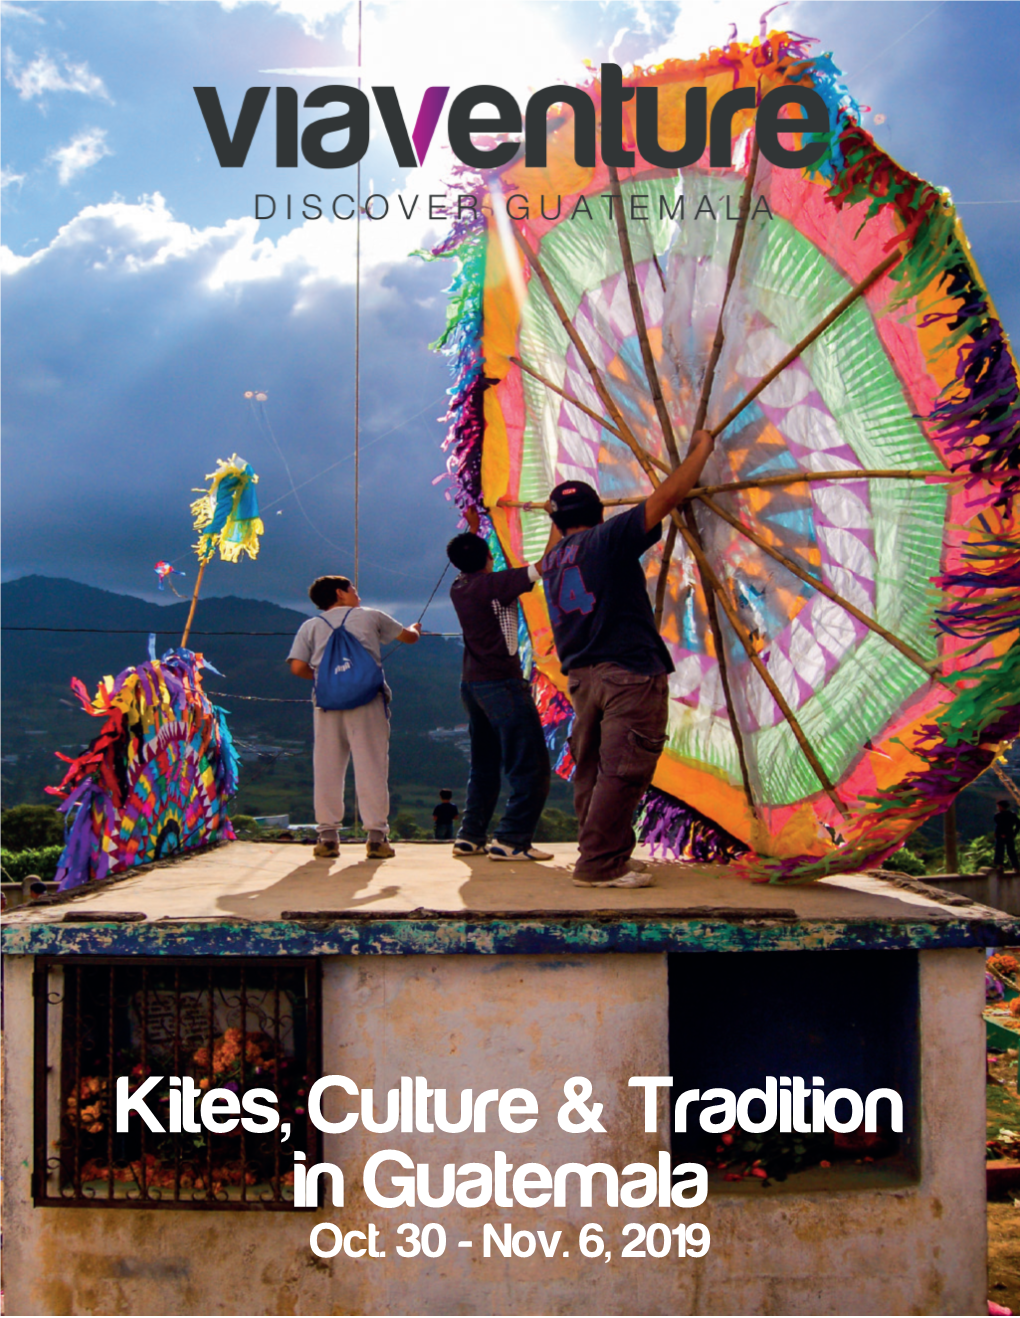 Kites, Culture & Tradition in Guatemala